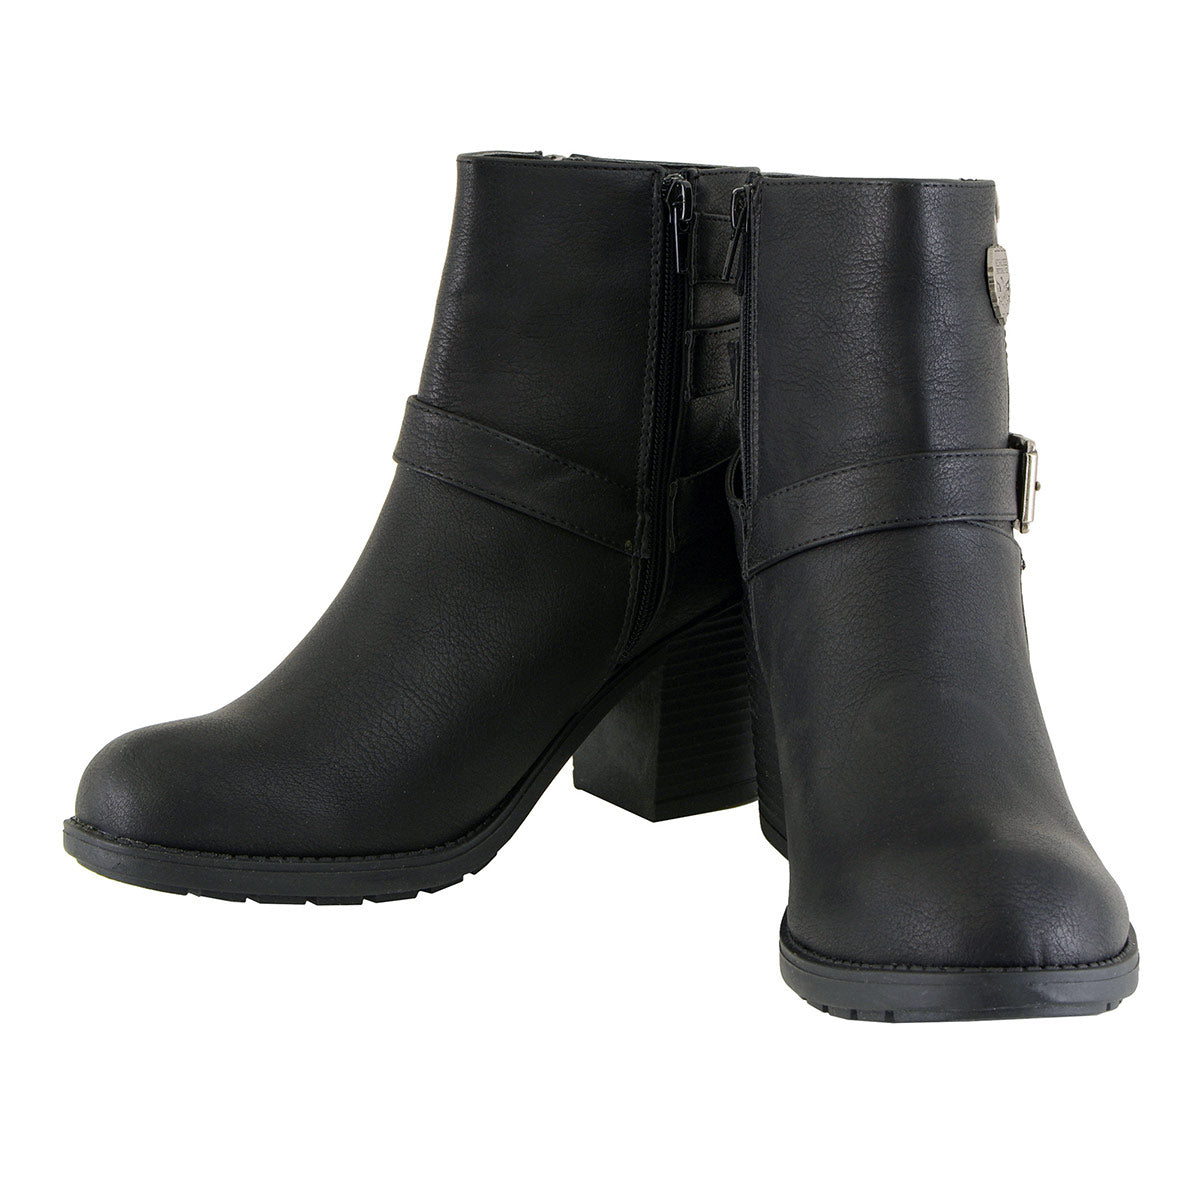 Milwaukee Leather MBL9405 Women's Short Black Boots with Side Zipper and Triple Buckle Adjustment